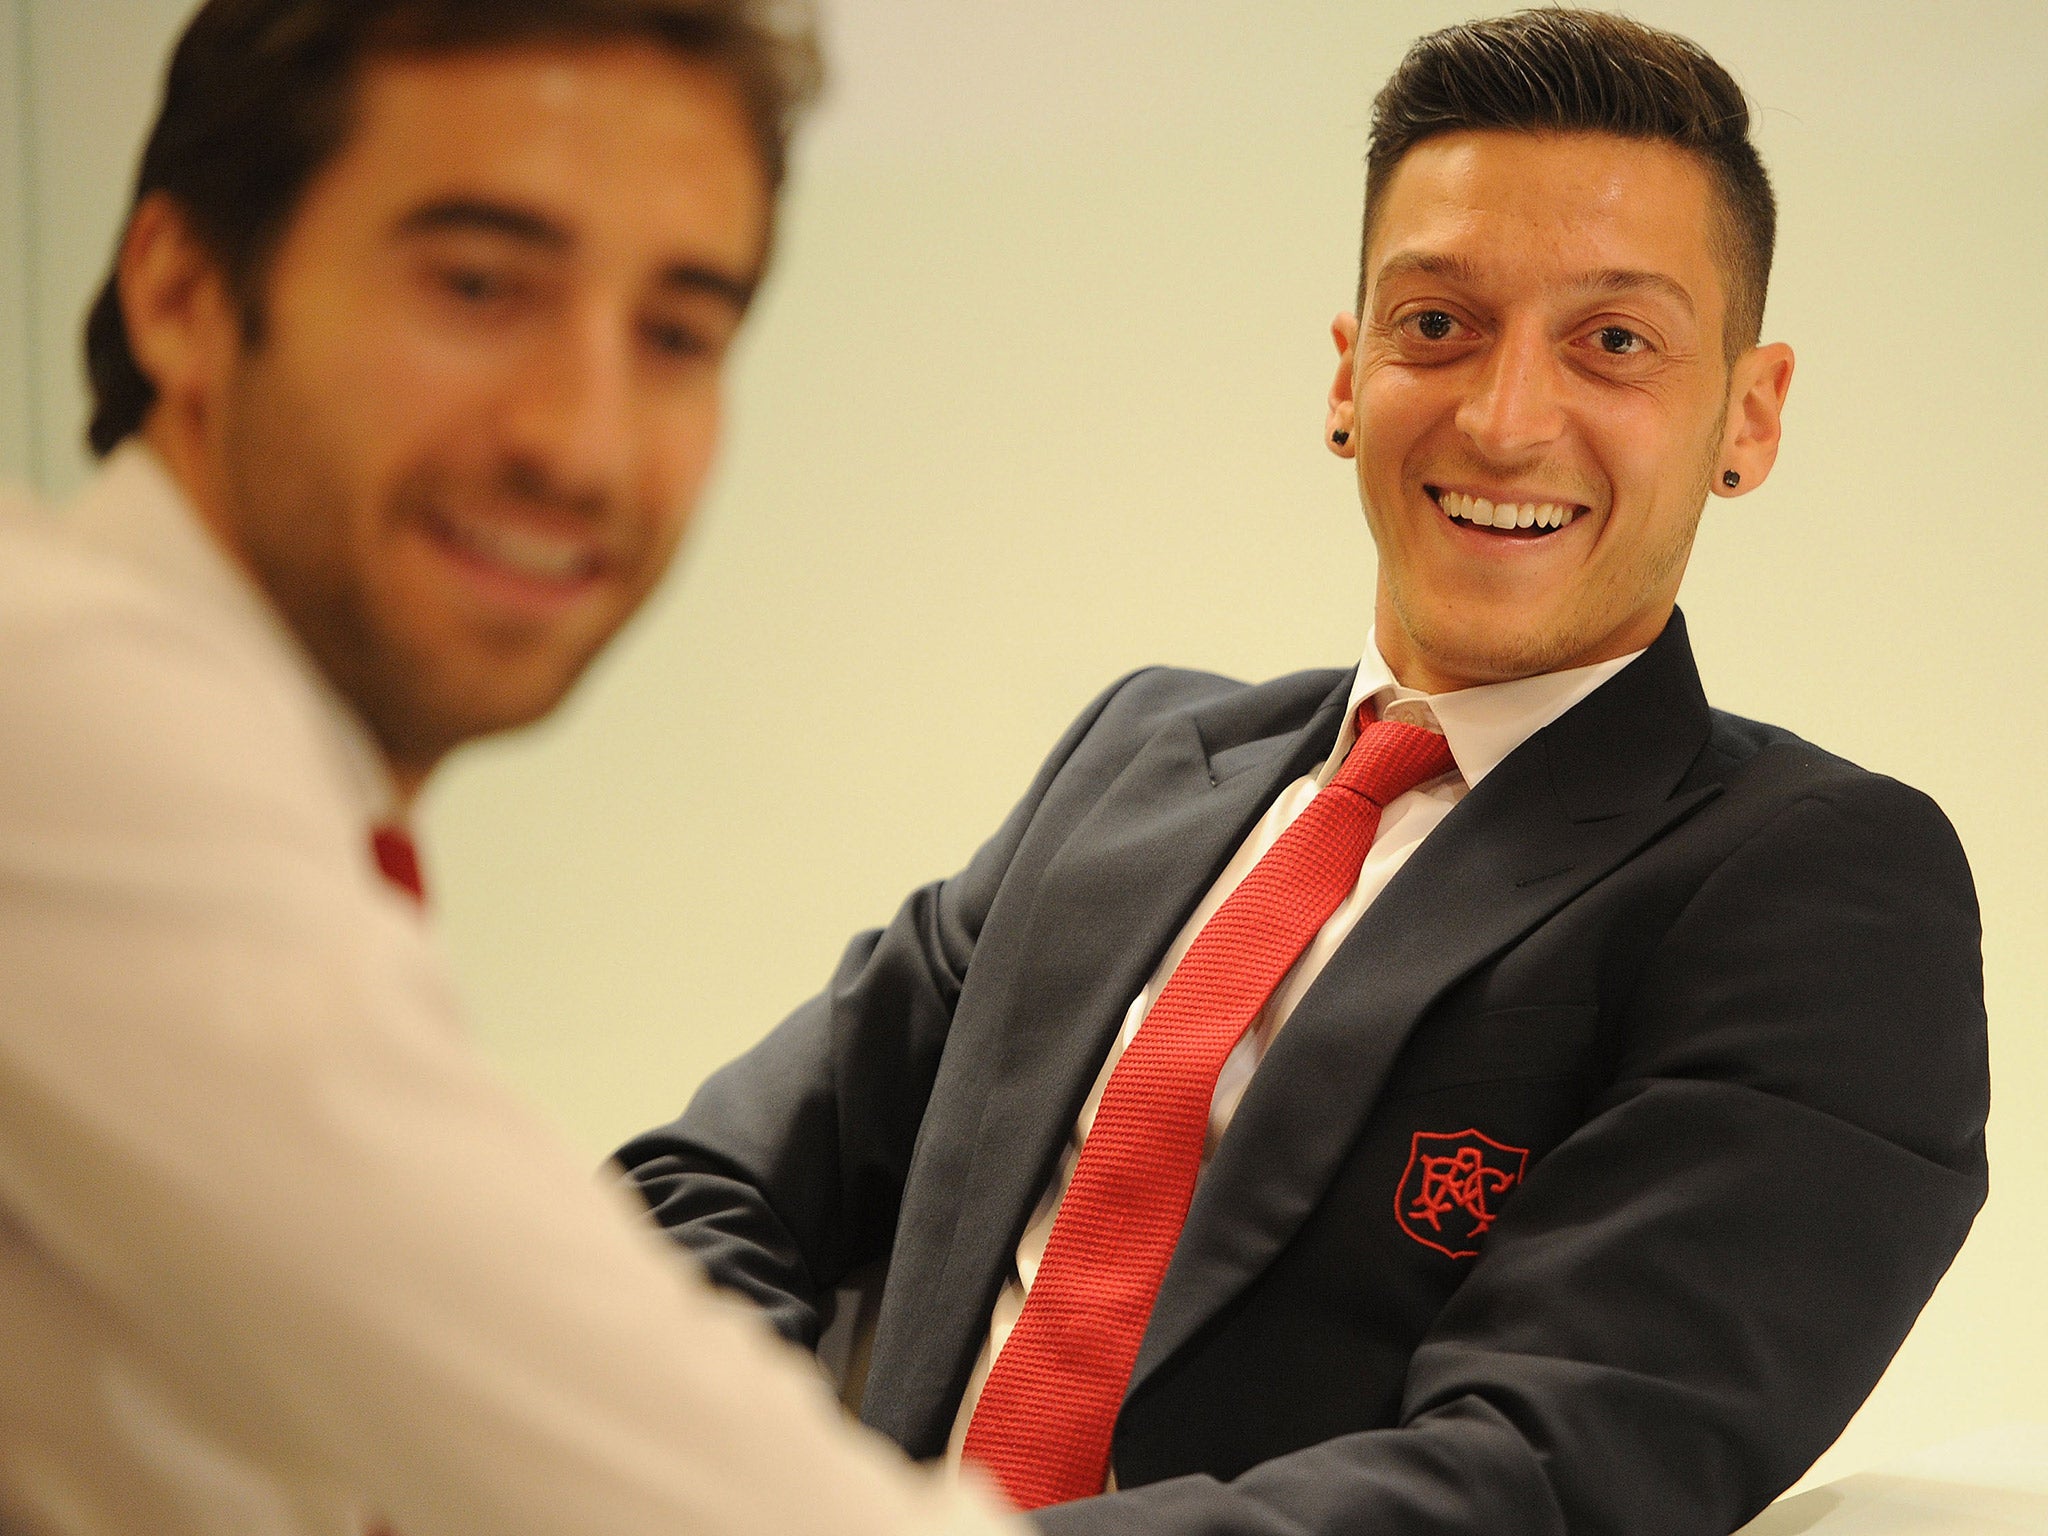 Mesut Özil could sign a new Arsenal deal worth £200,000-a-week